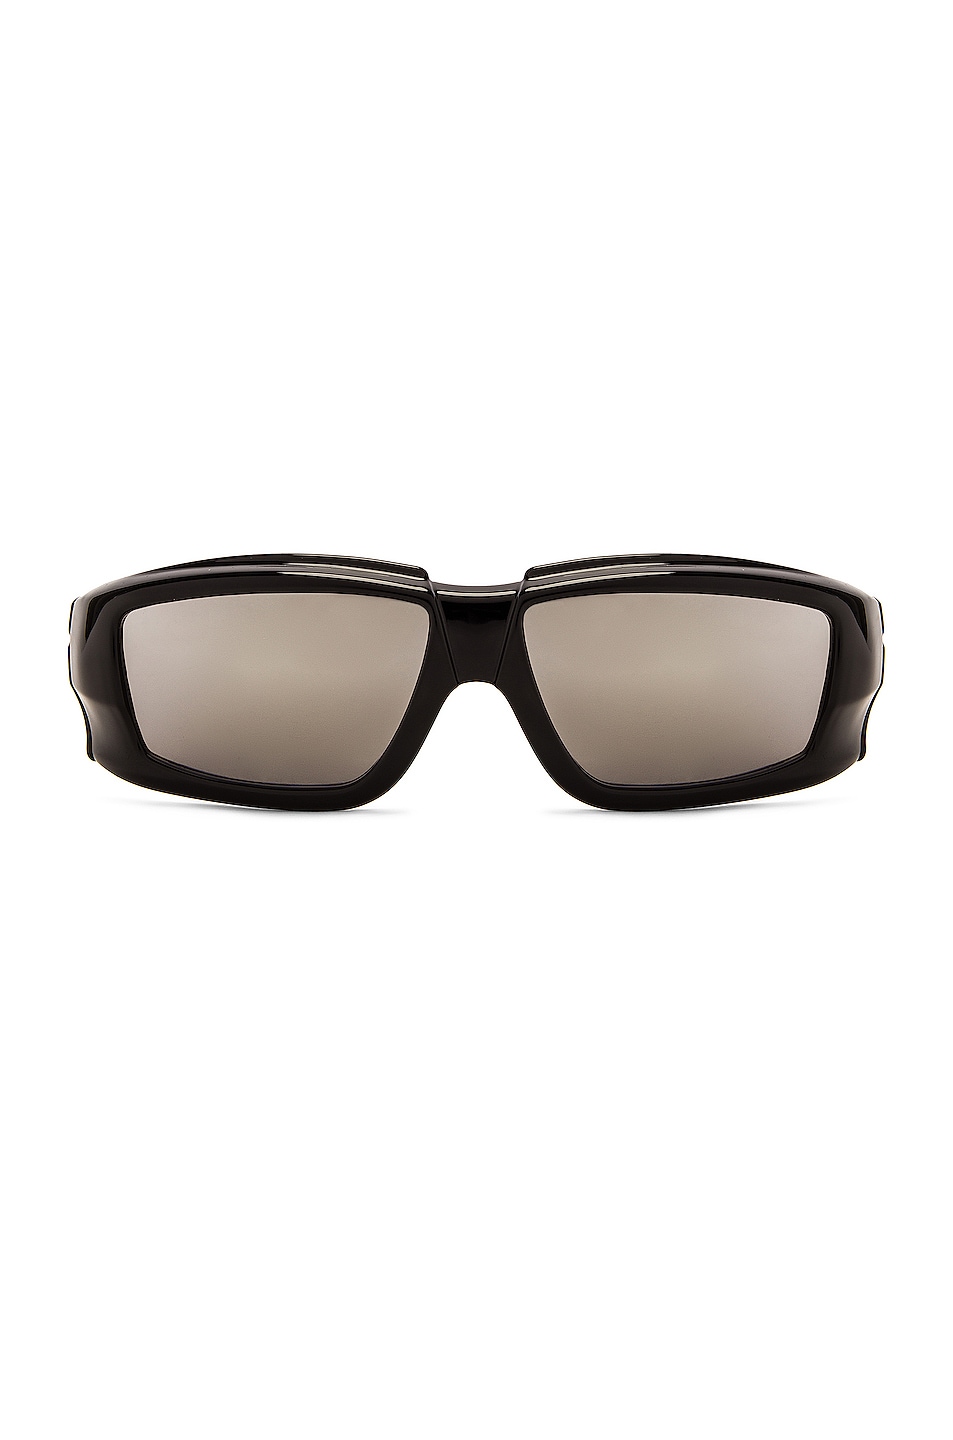 Image 1 of Rick Owens Rick Sunglasses in Black & Silver